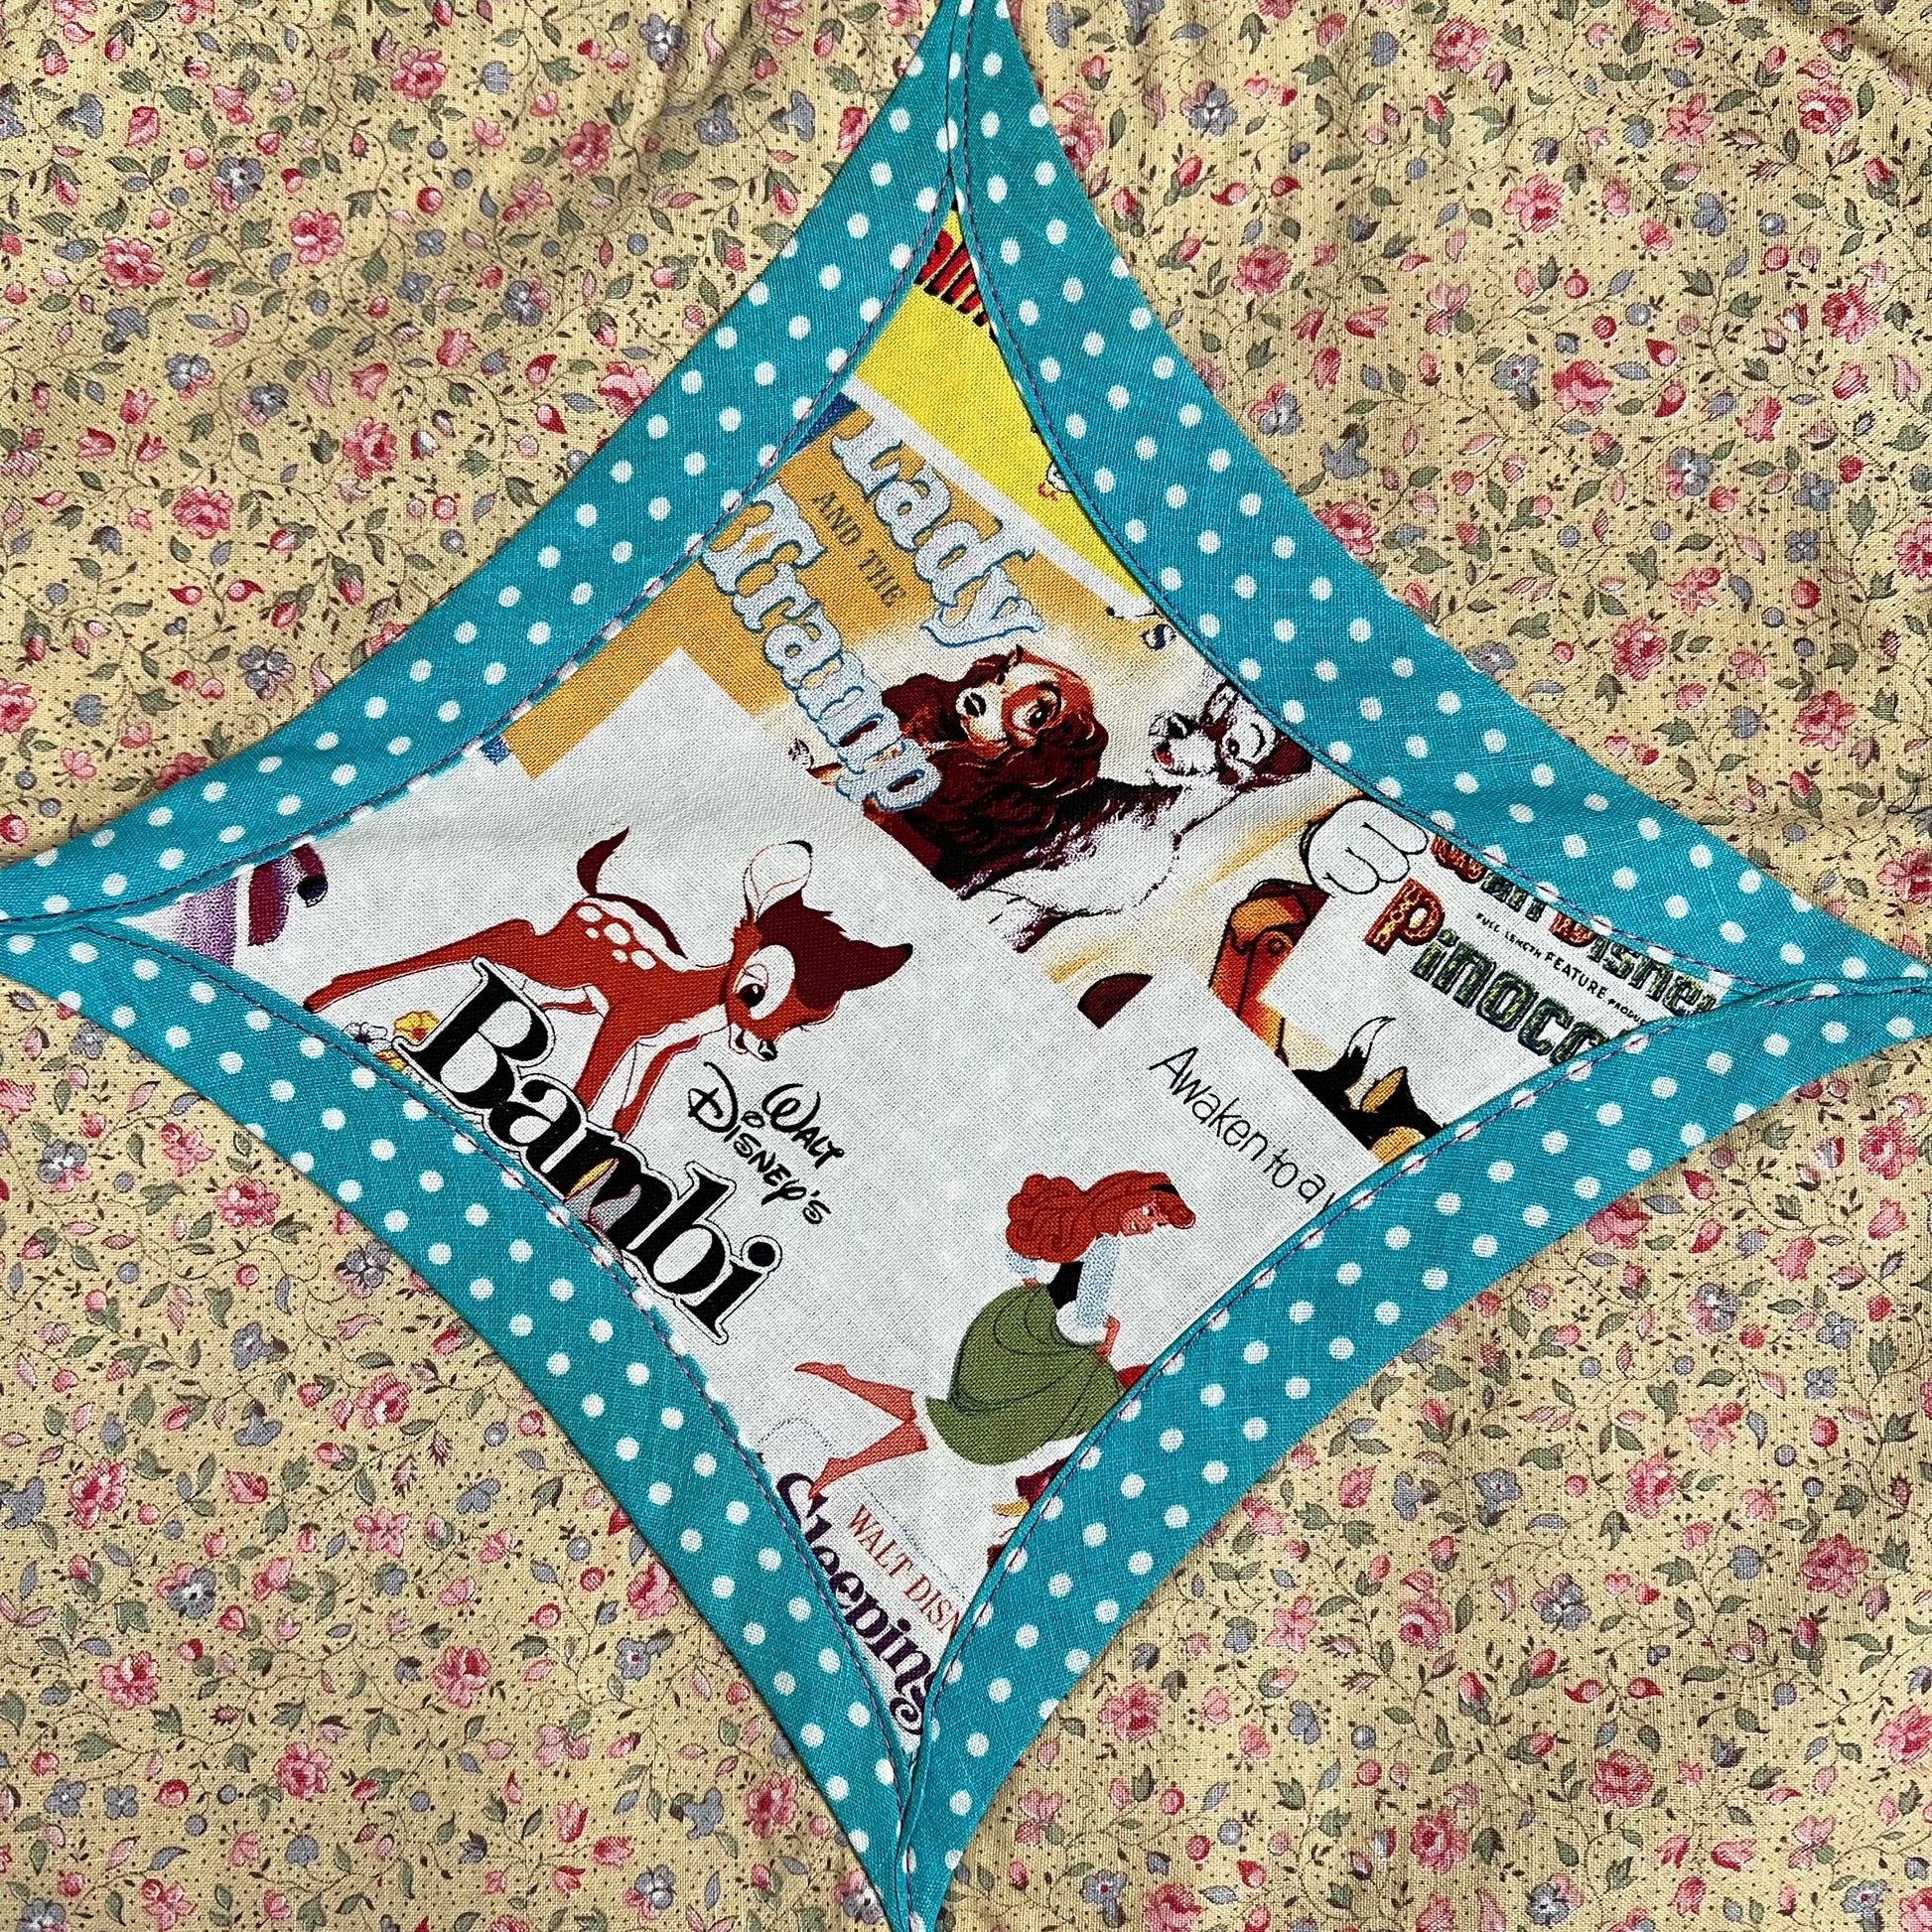 disney bambi fabric square, surrounded by blue polkadots, then light floral fabric